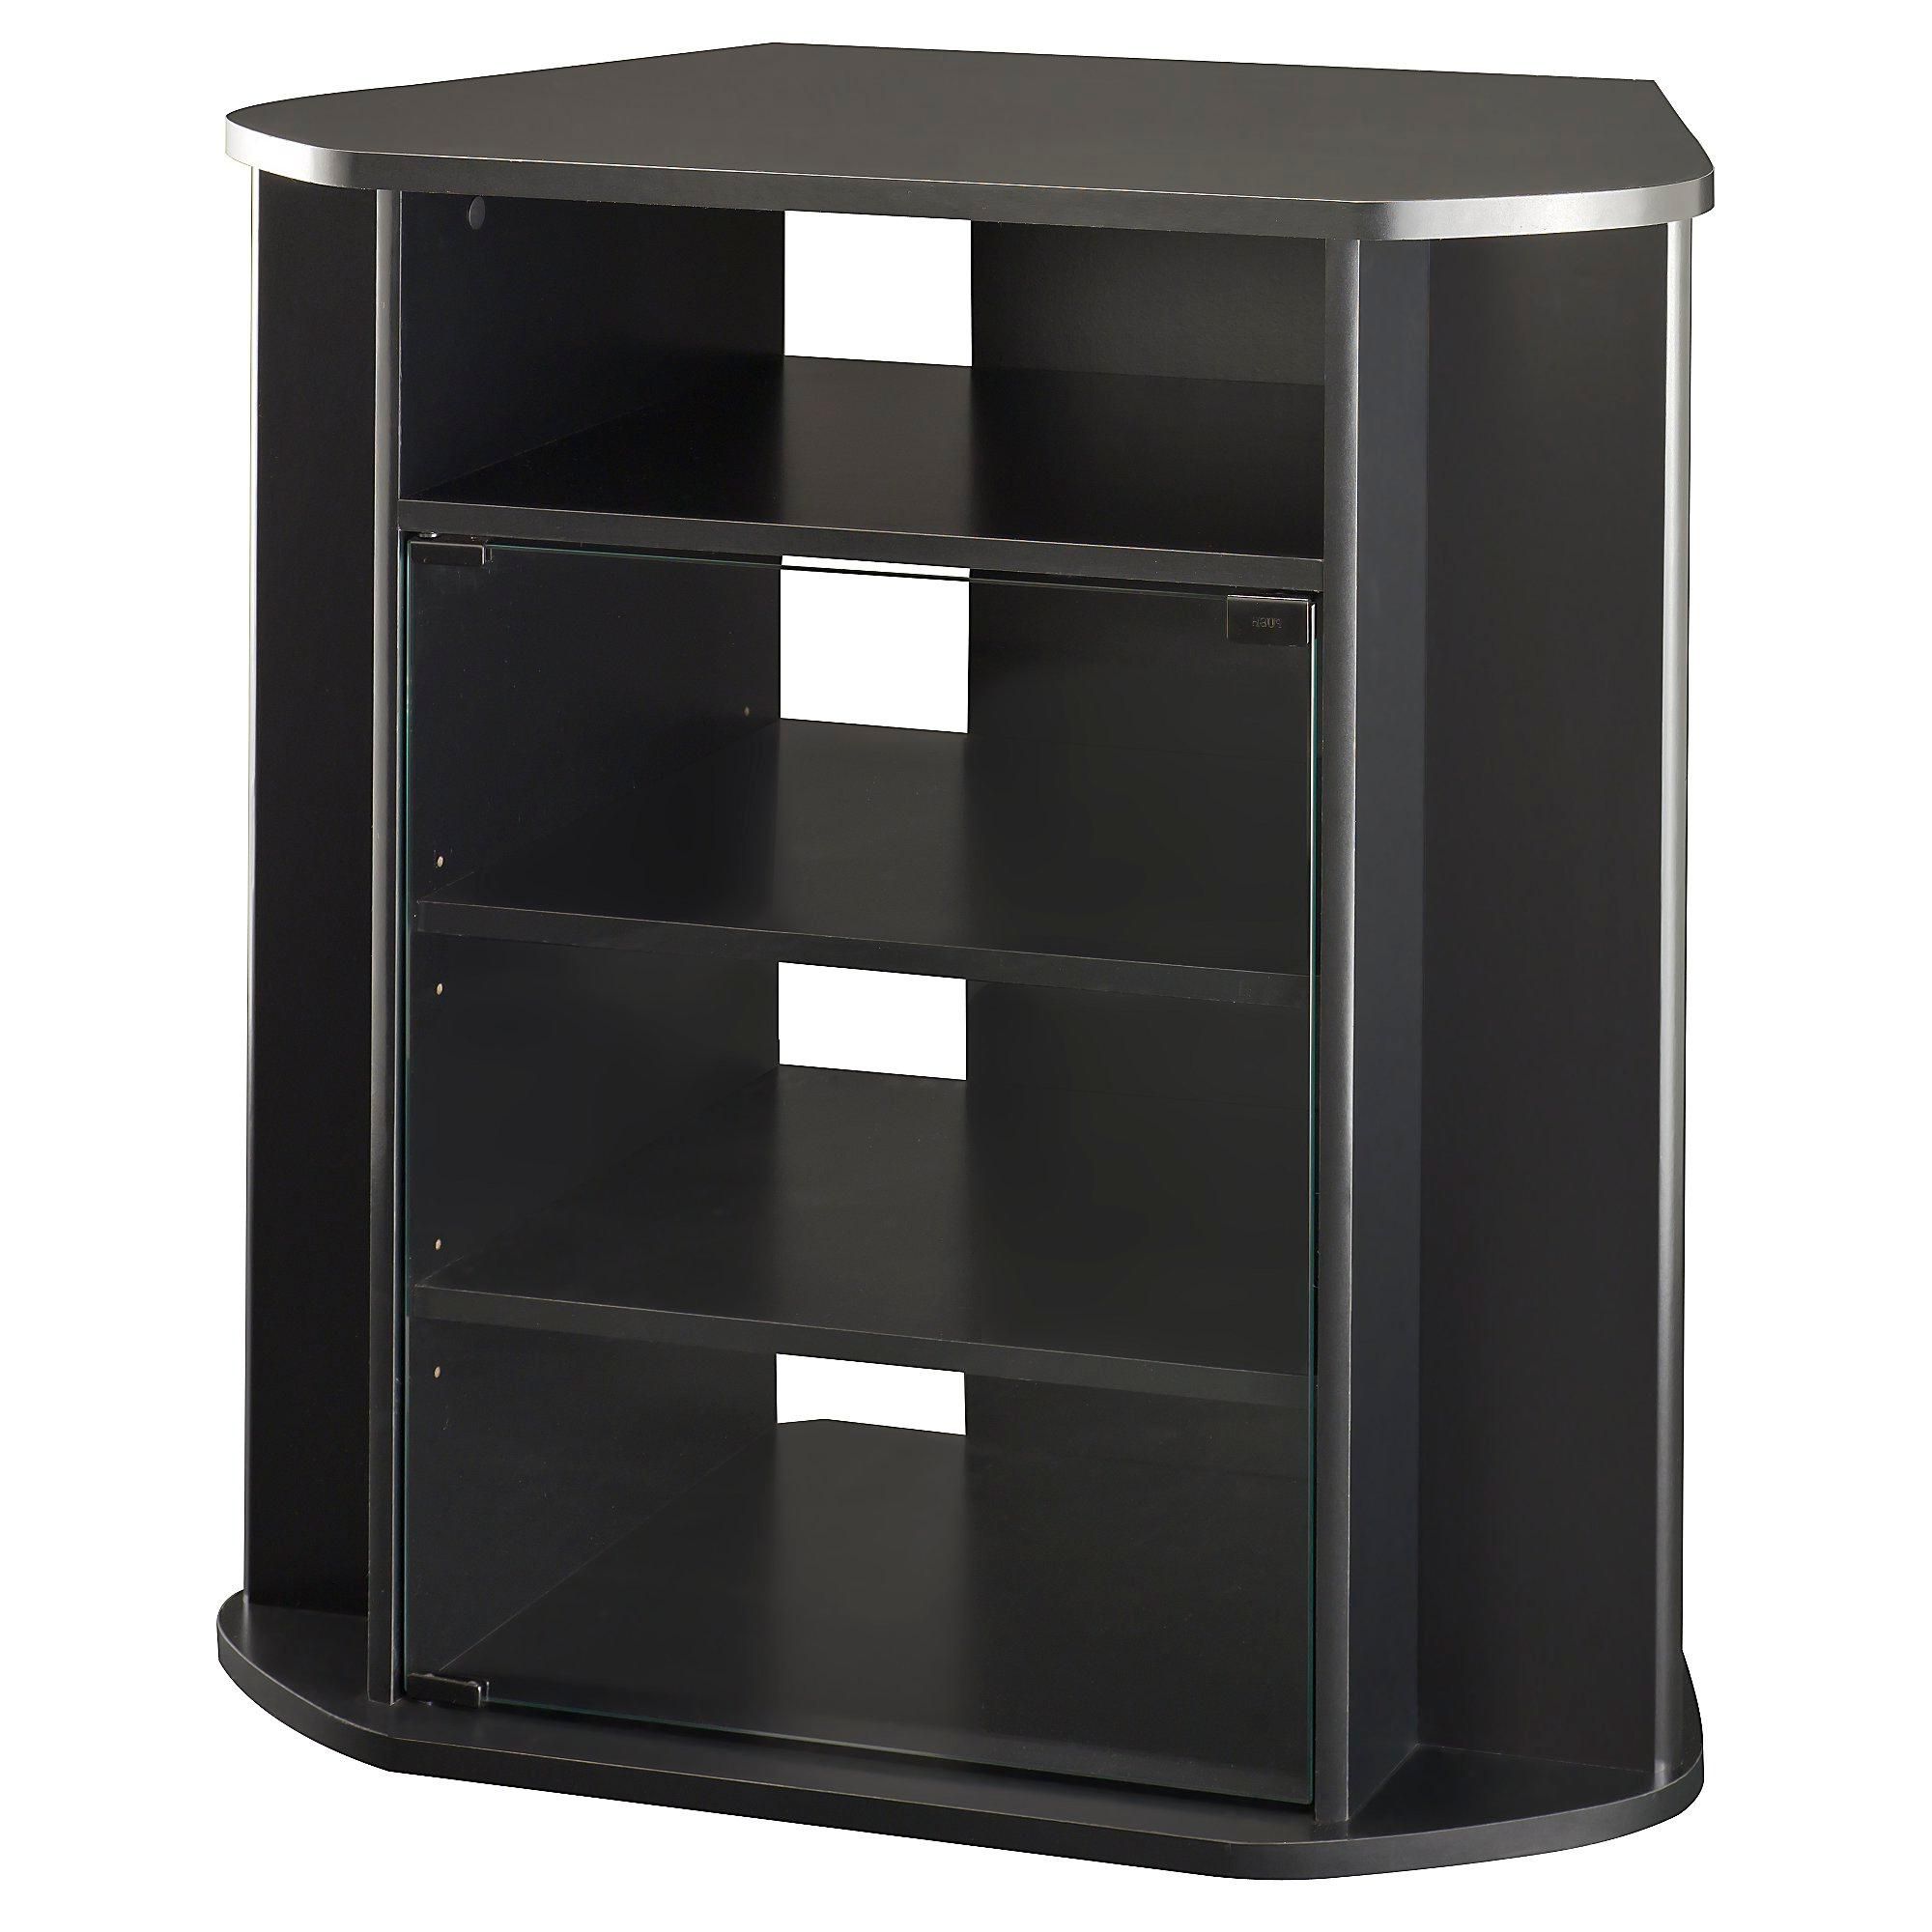 Favorite Very Tall Tv Stands Inside Bush Furniture Visions Tall Corner Tv Stand In Black: Amazon (View 14 of 20)